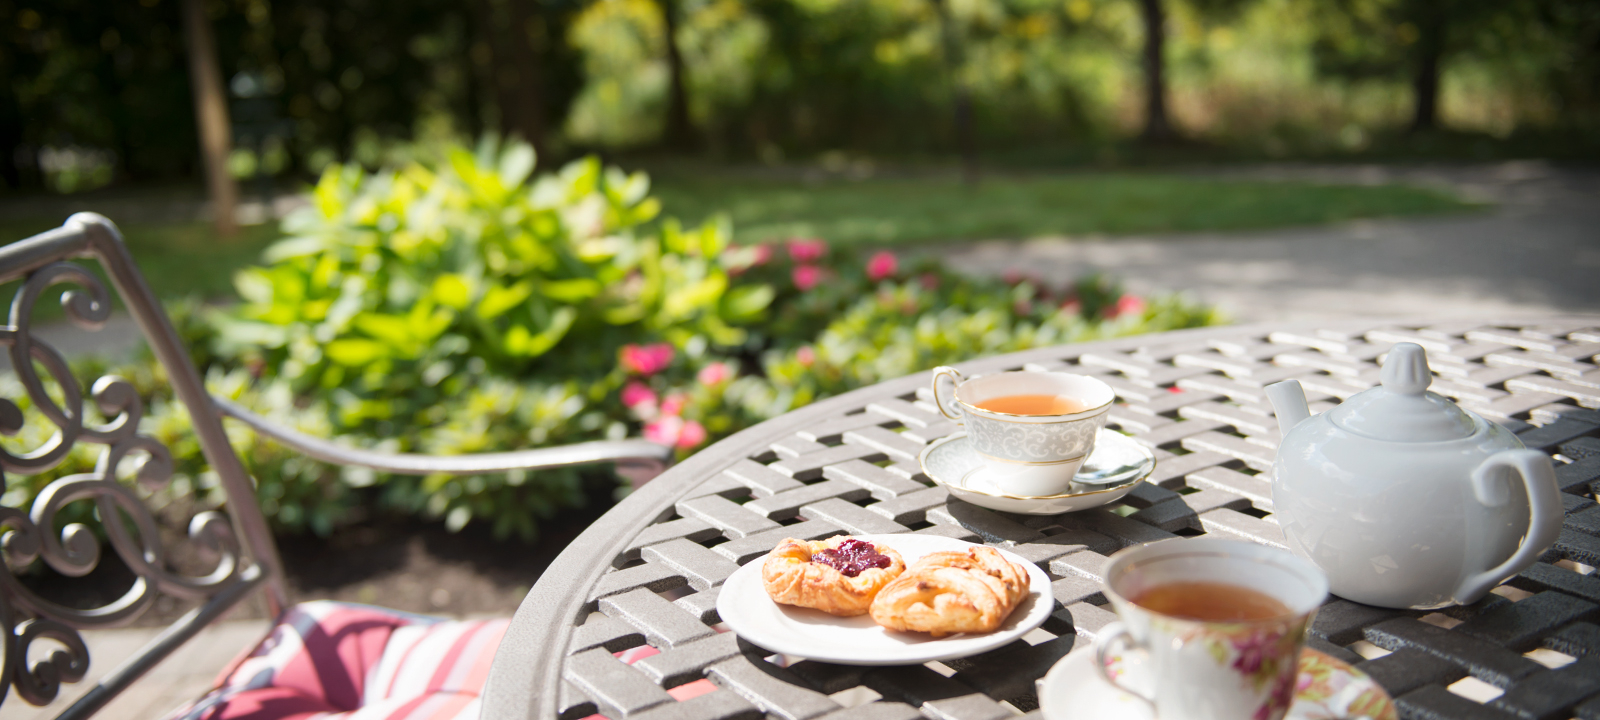 Pastries on patio table at Amica Newmarket senior residence.